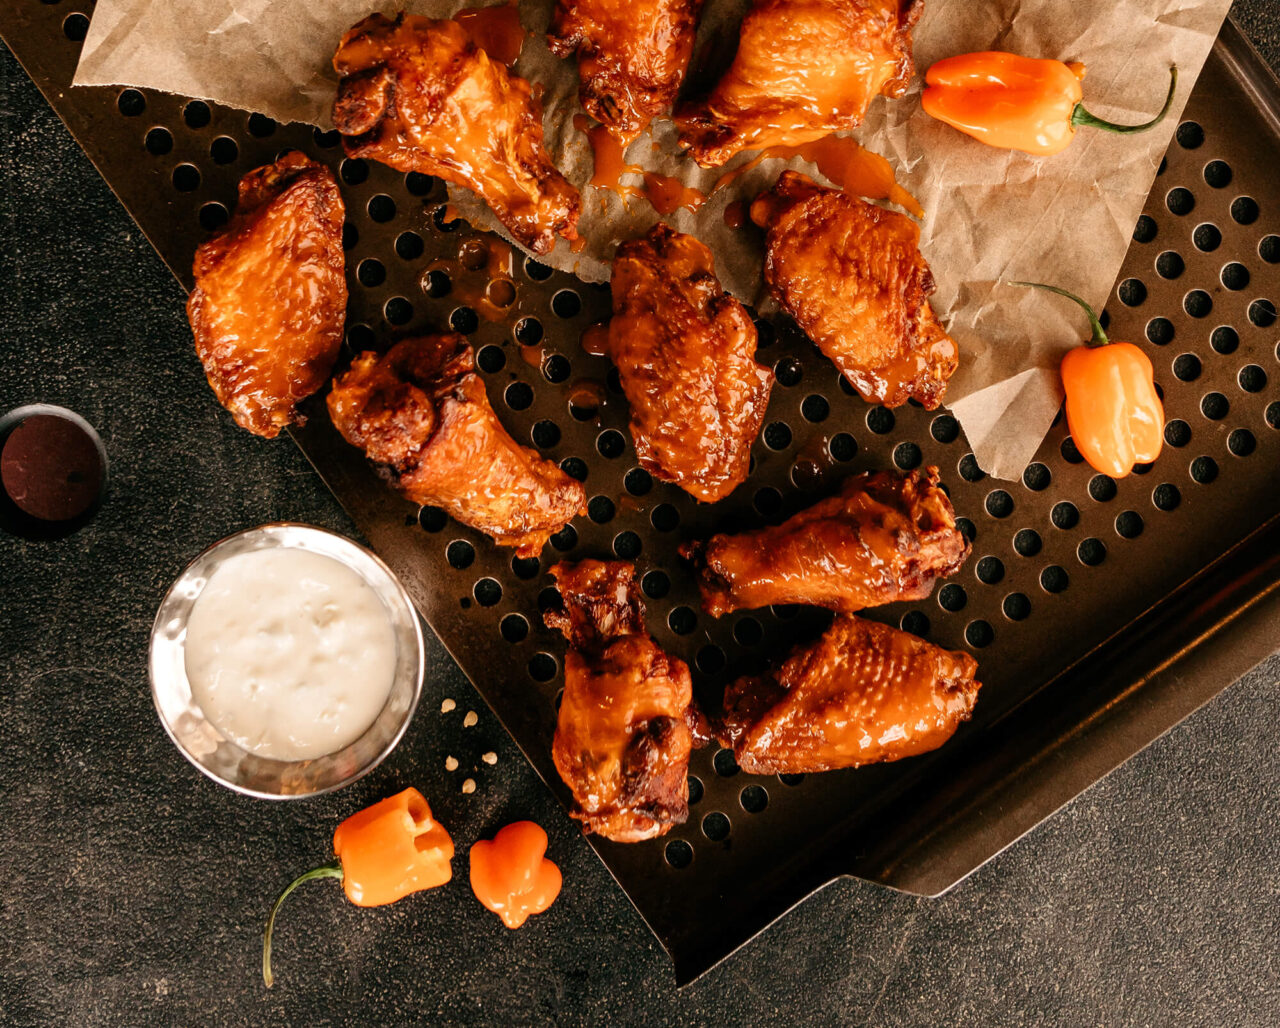 Texas-sized wings